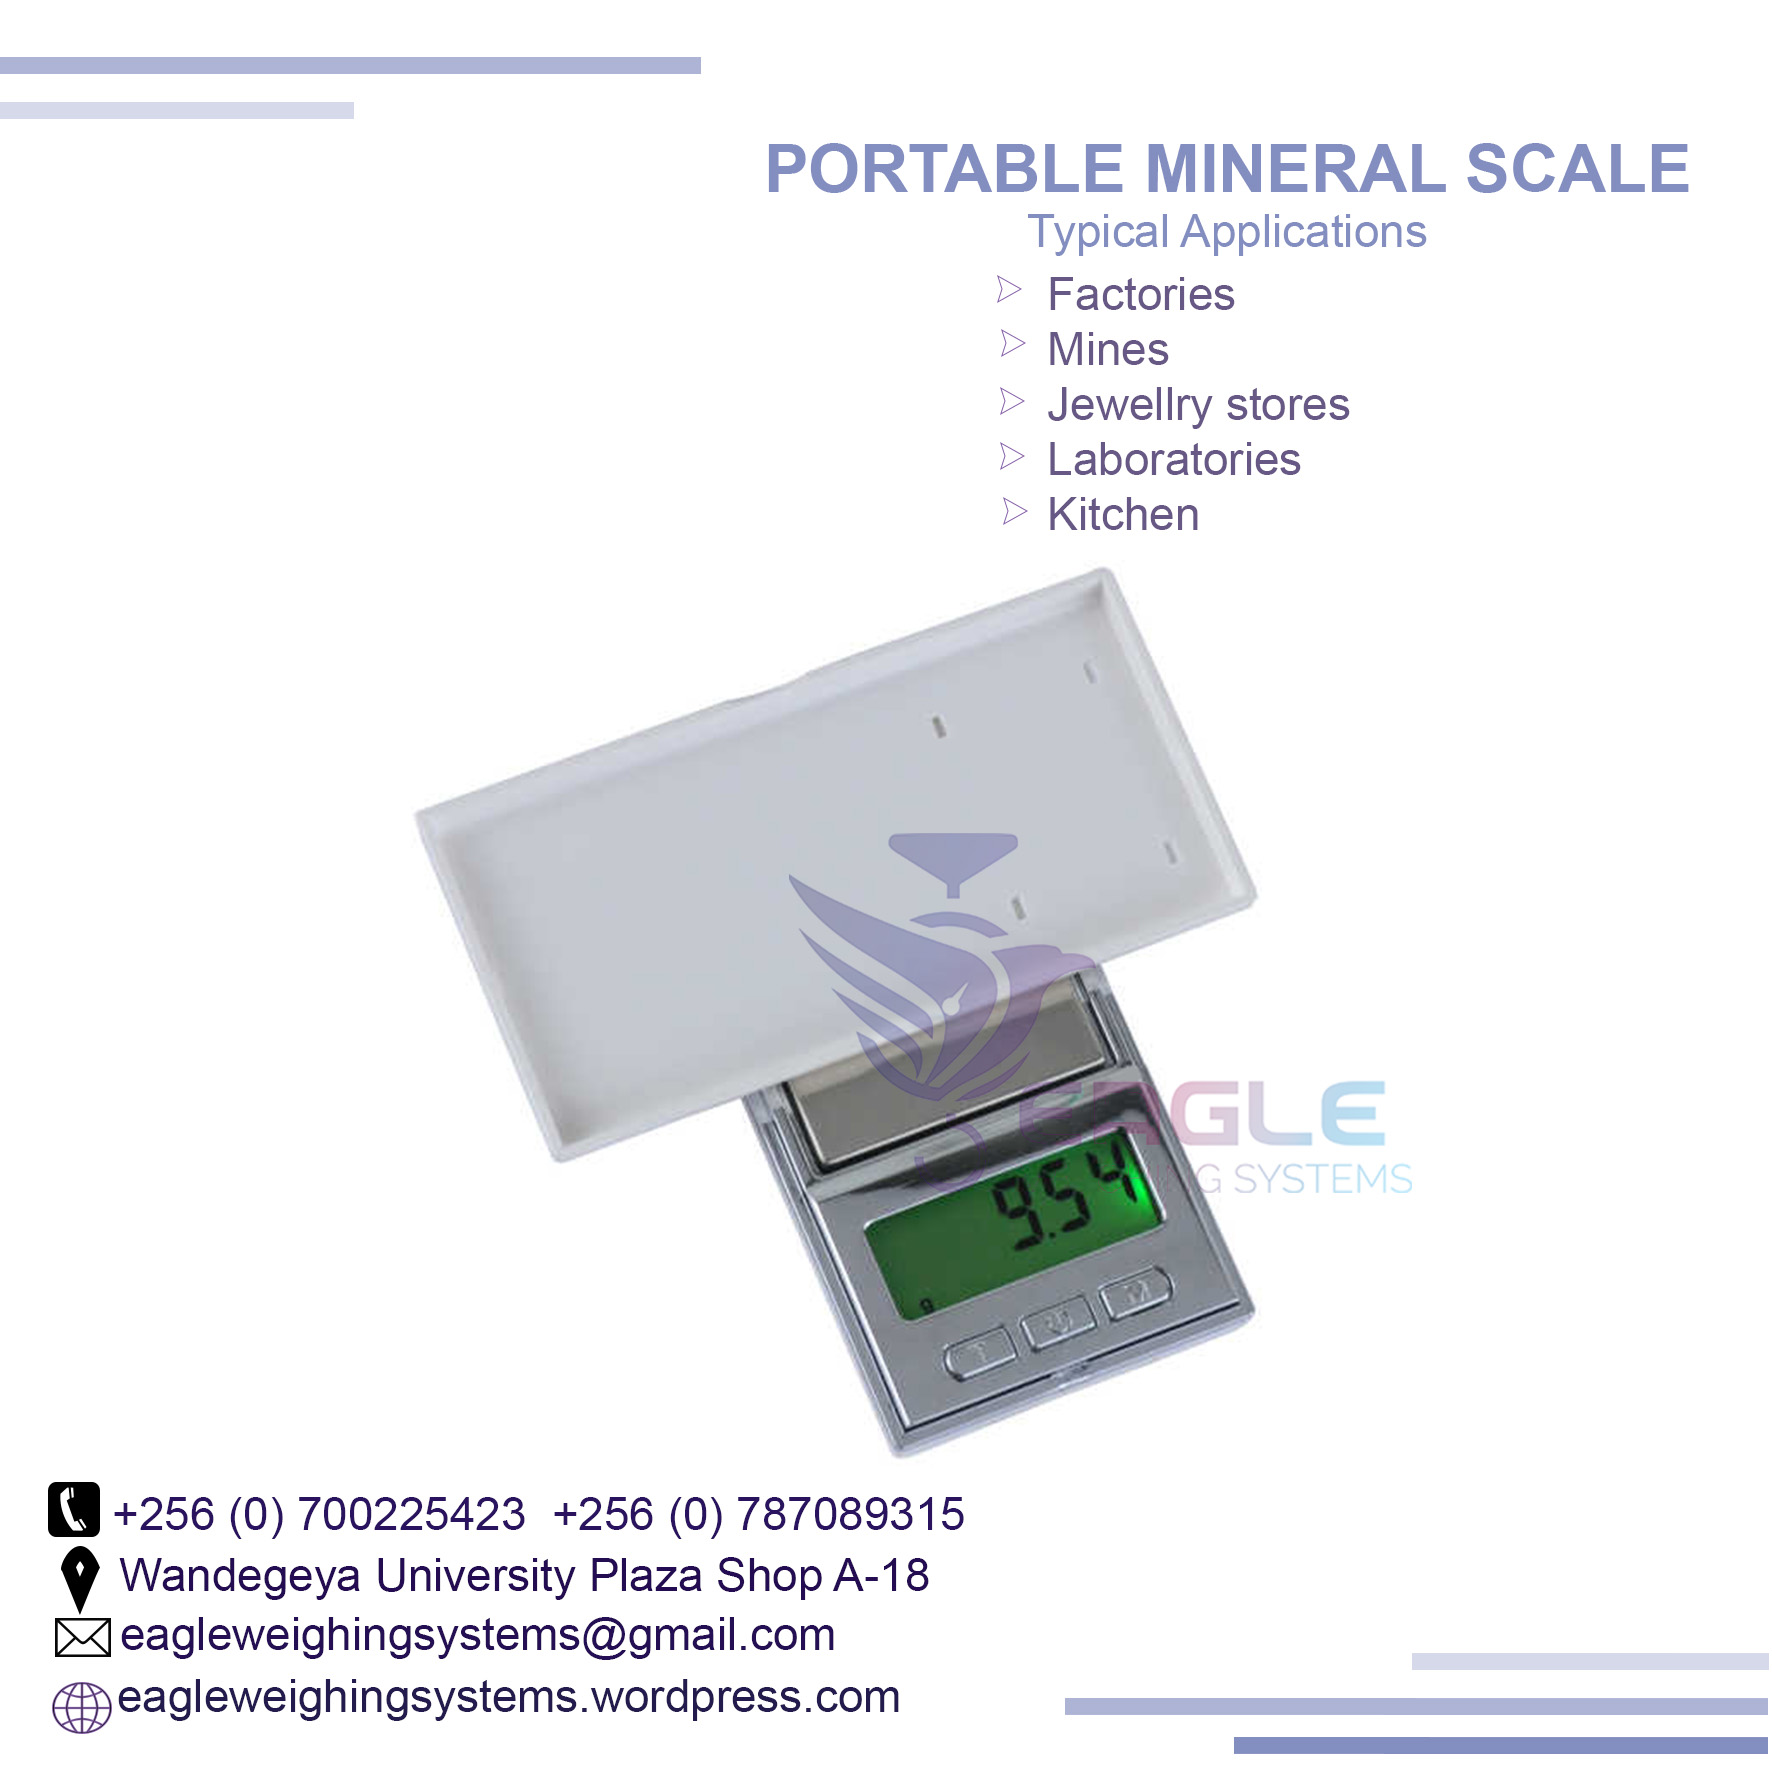 Electronic Weighing Portable mineral, jewelry Scales in Kampala, Kampala Central Division, Central, Uganda